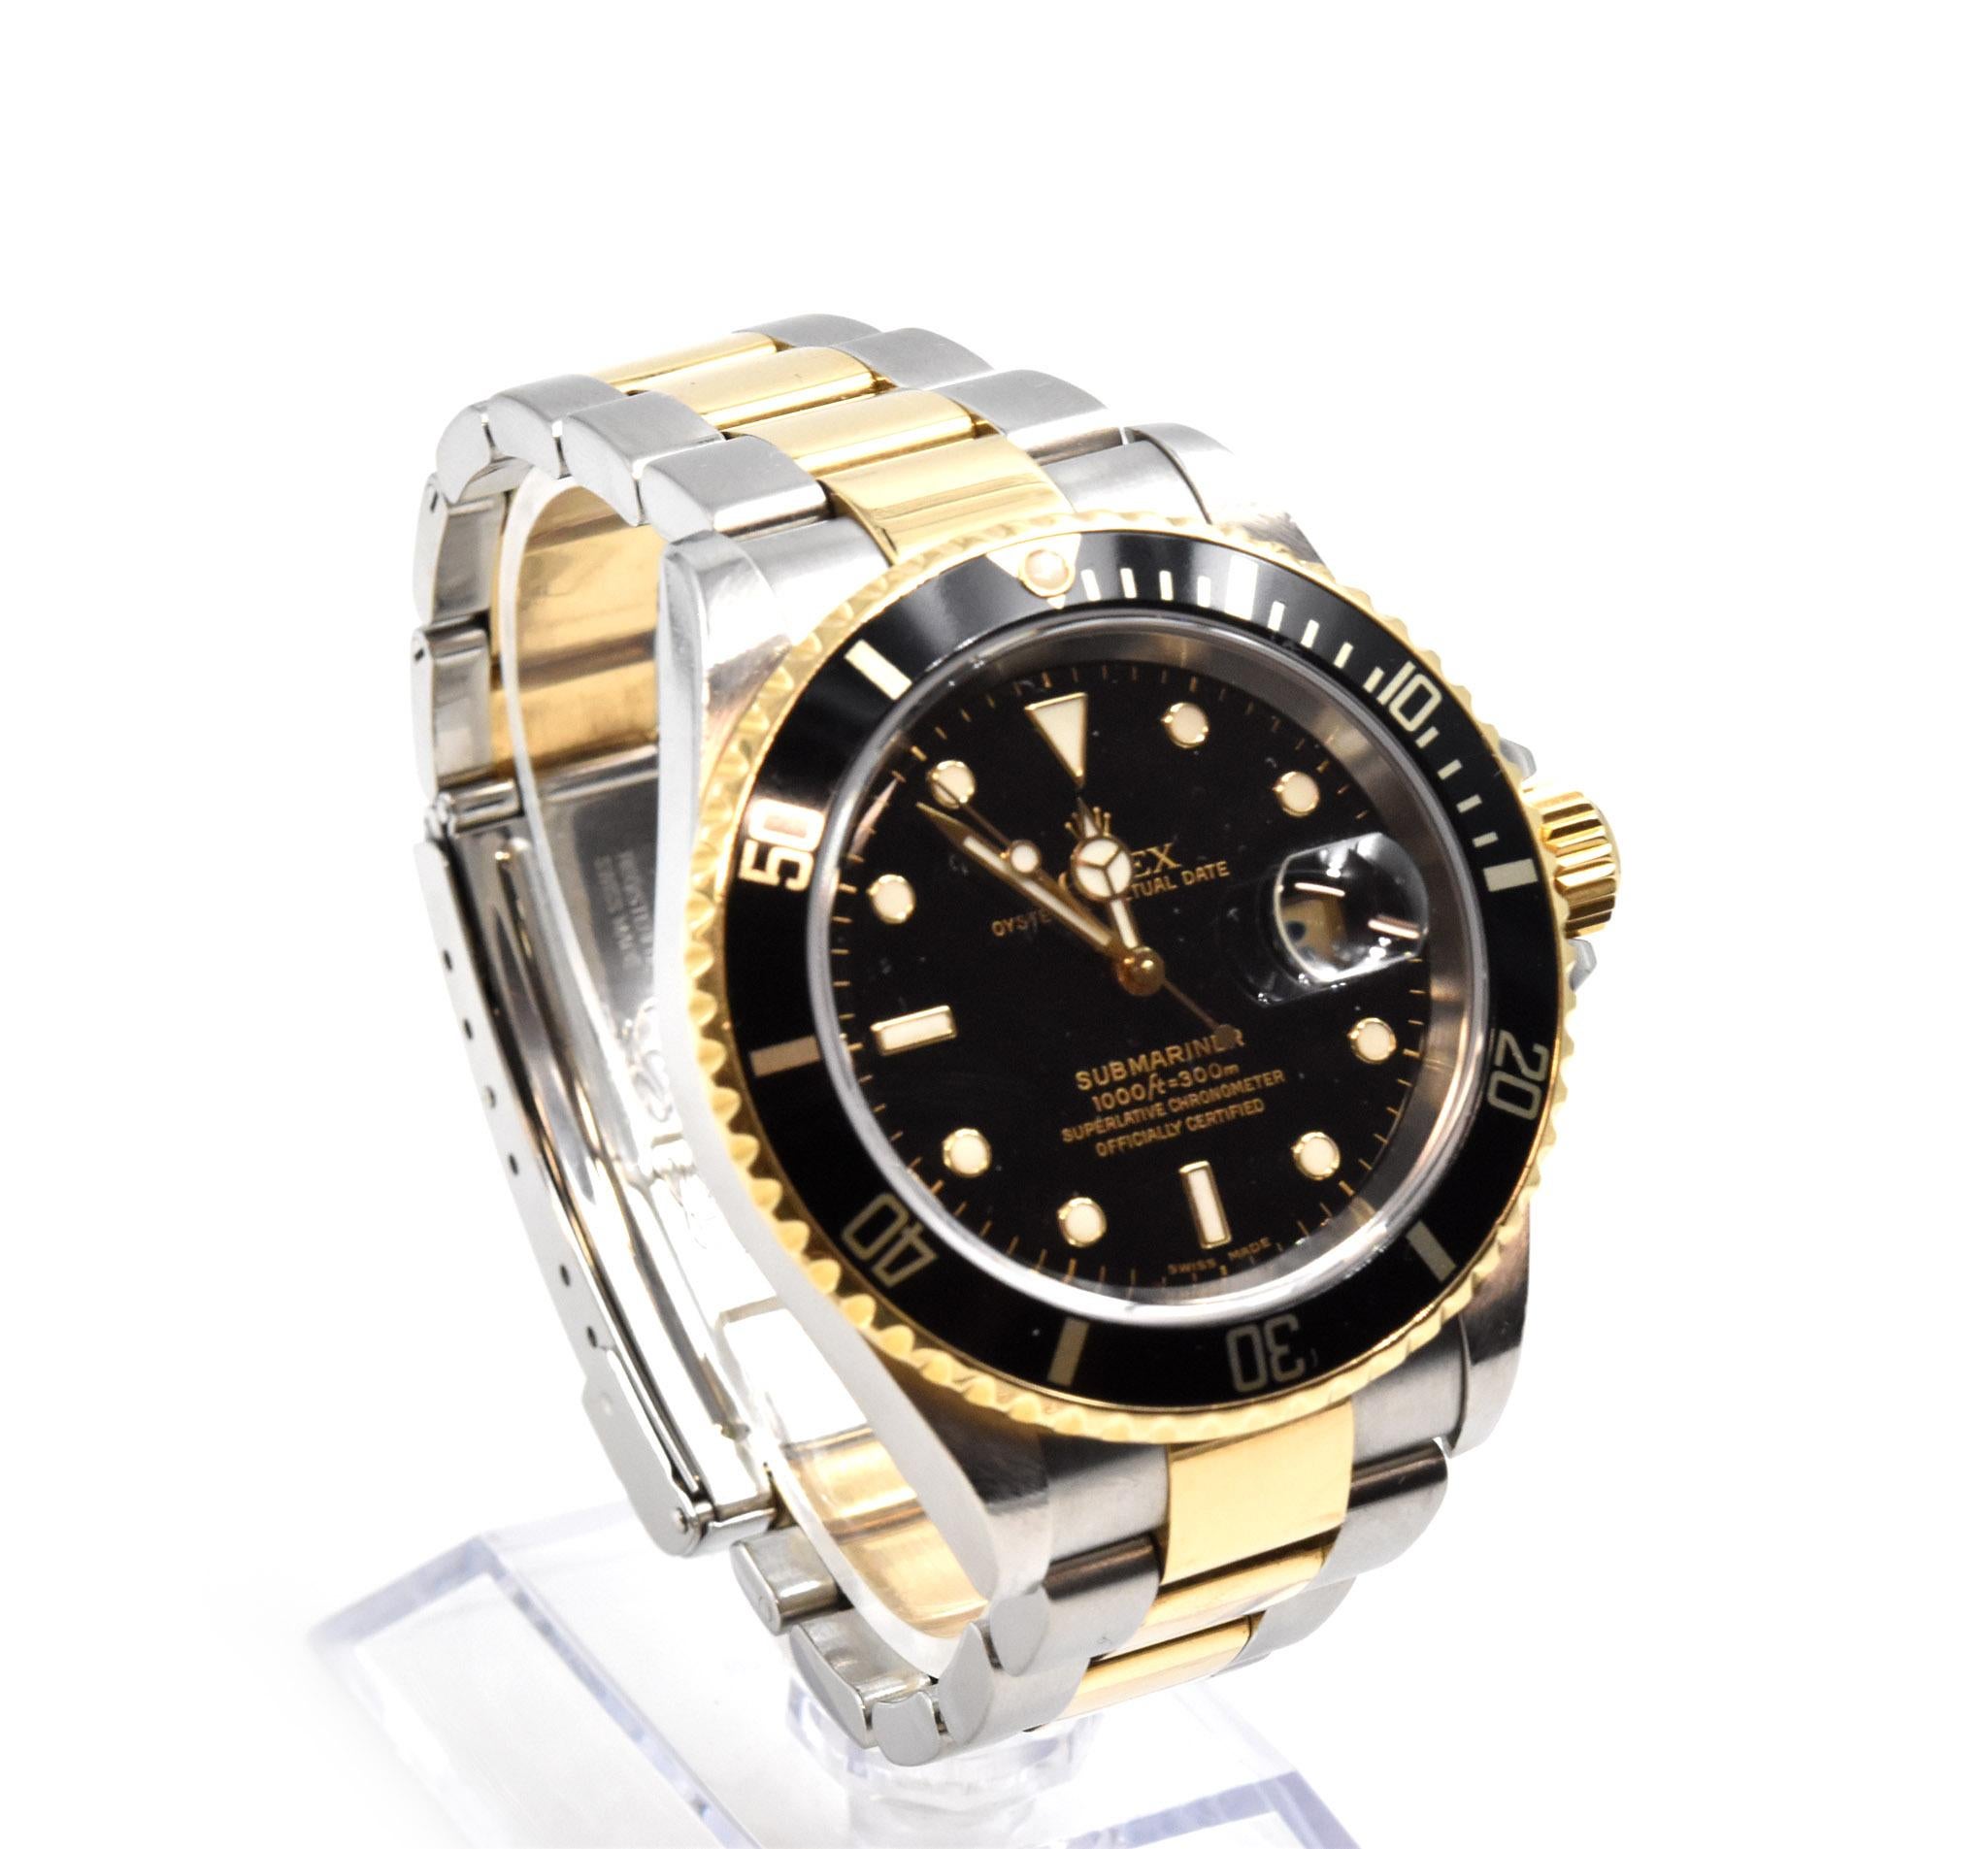 Movement: automatic 3135 movement
Function: hours, minutes, seconds, date
Case: round 40mm 18k yellow gold & stainless-steel case, sapphire crystal, 18k yellow gold bezel with black insert, yellow gold screw-down crown, waterproof to 100